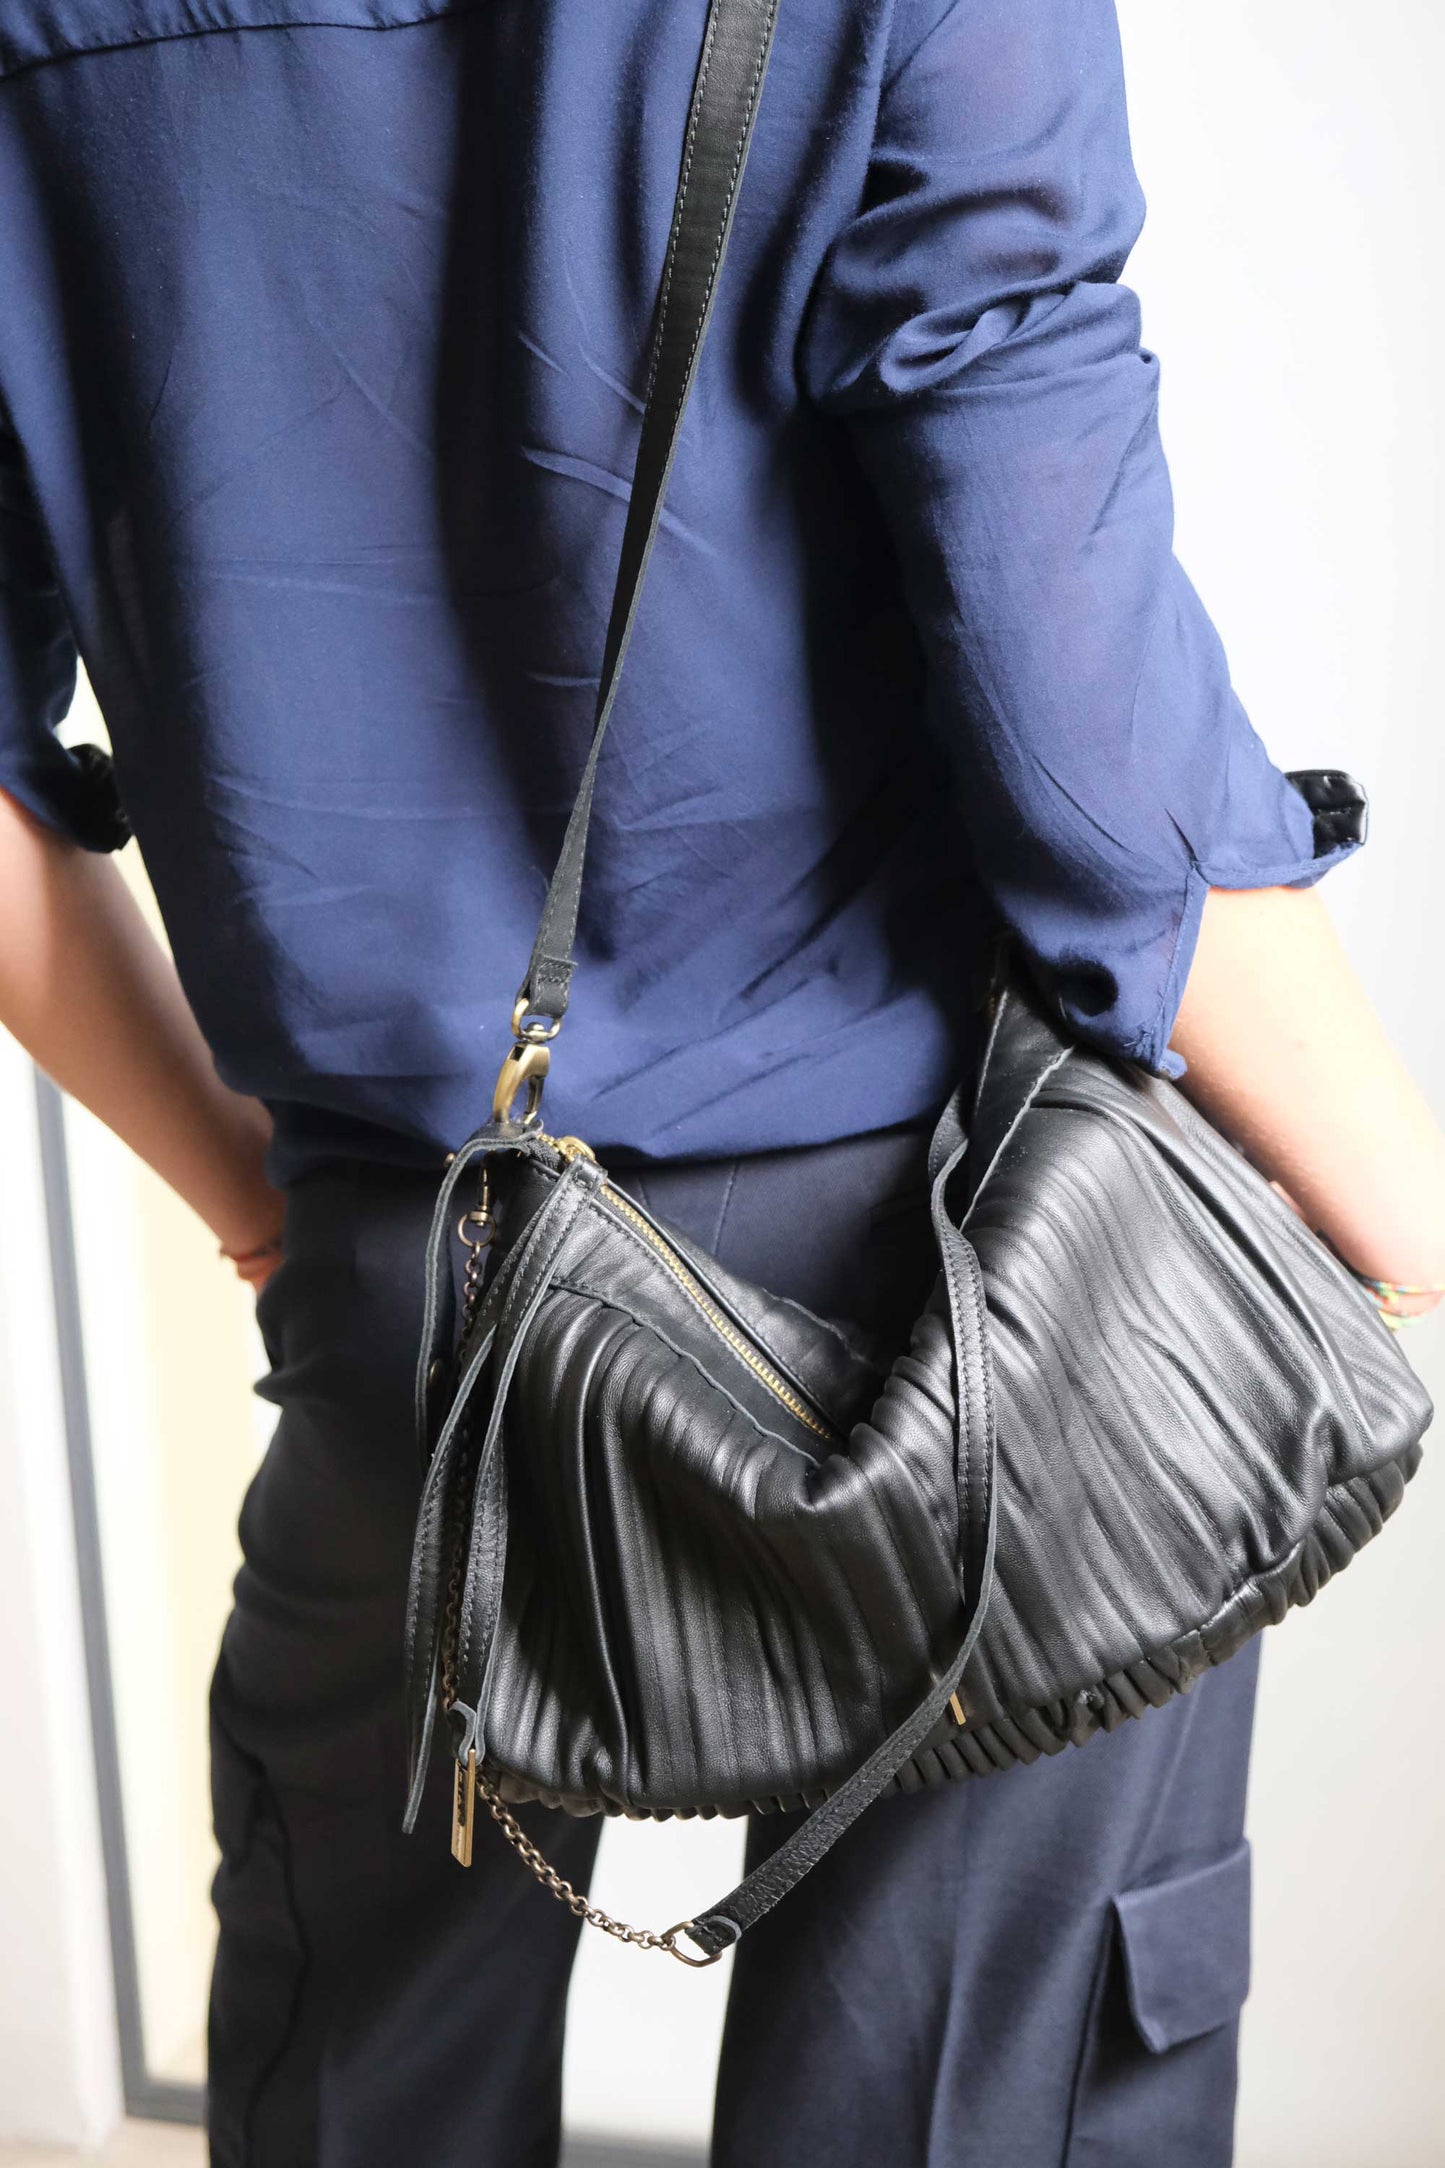 Chicca Media hobo bag in black pleated leather